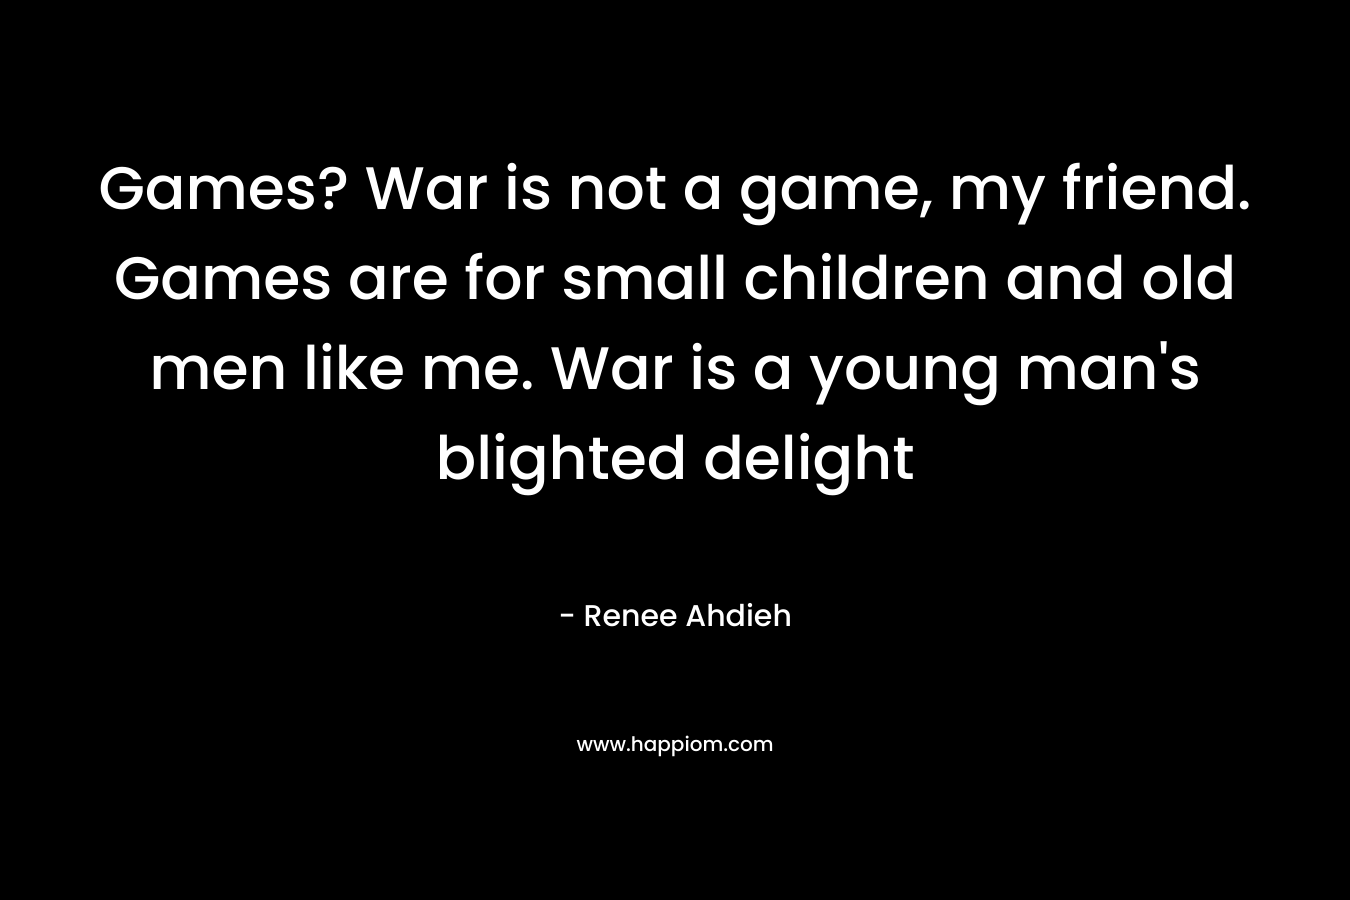 Games? War is not a game, my friend. Games are for small children and old men like me. War is a young man's blighted delight